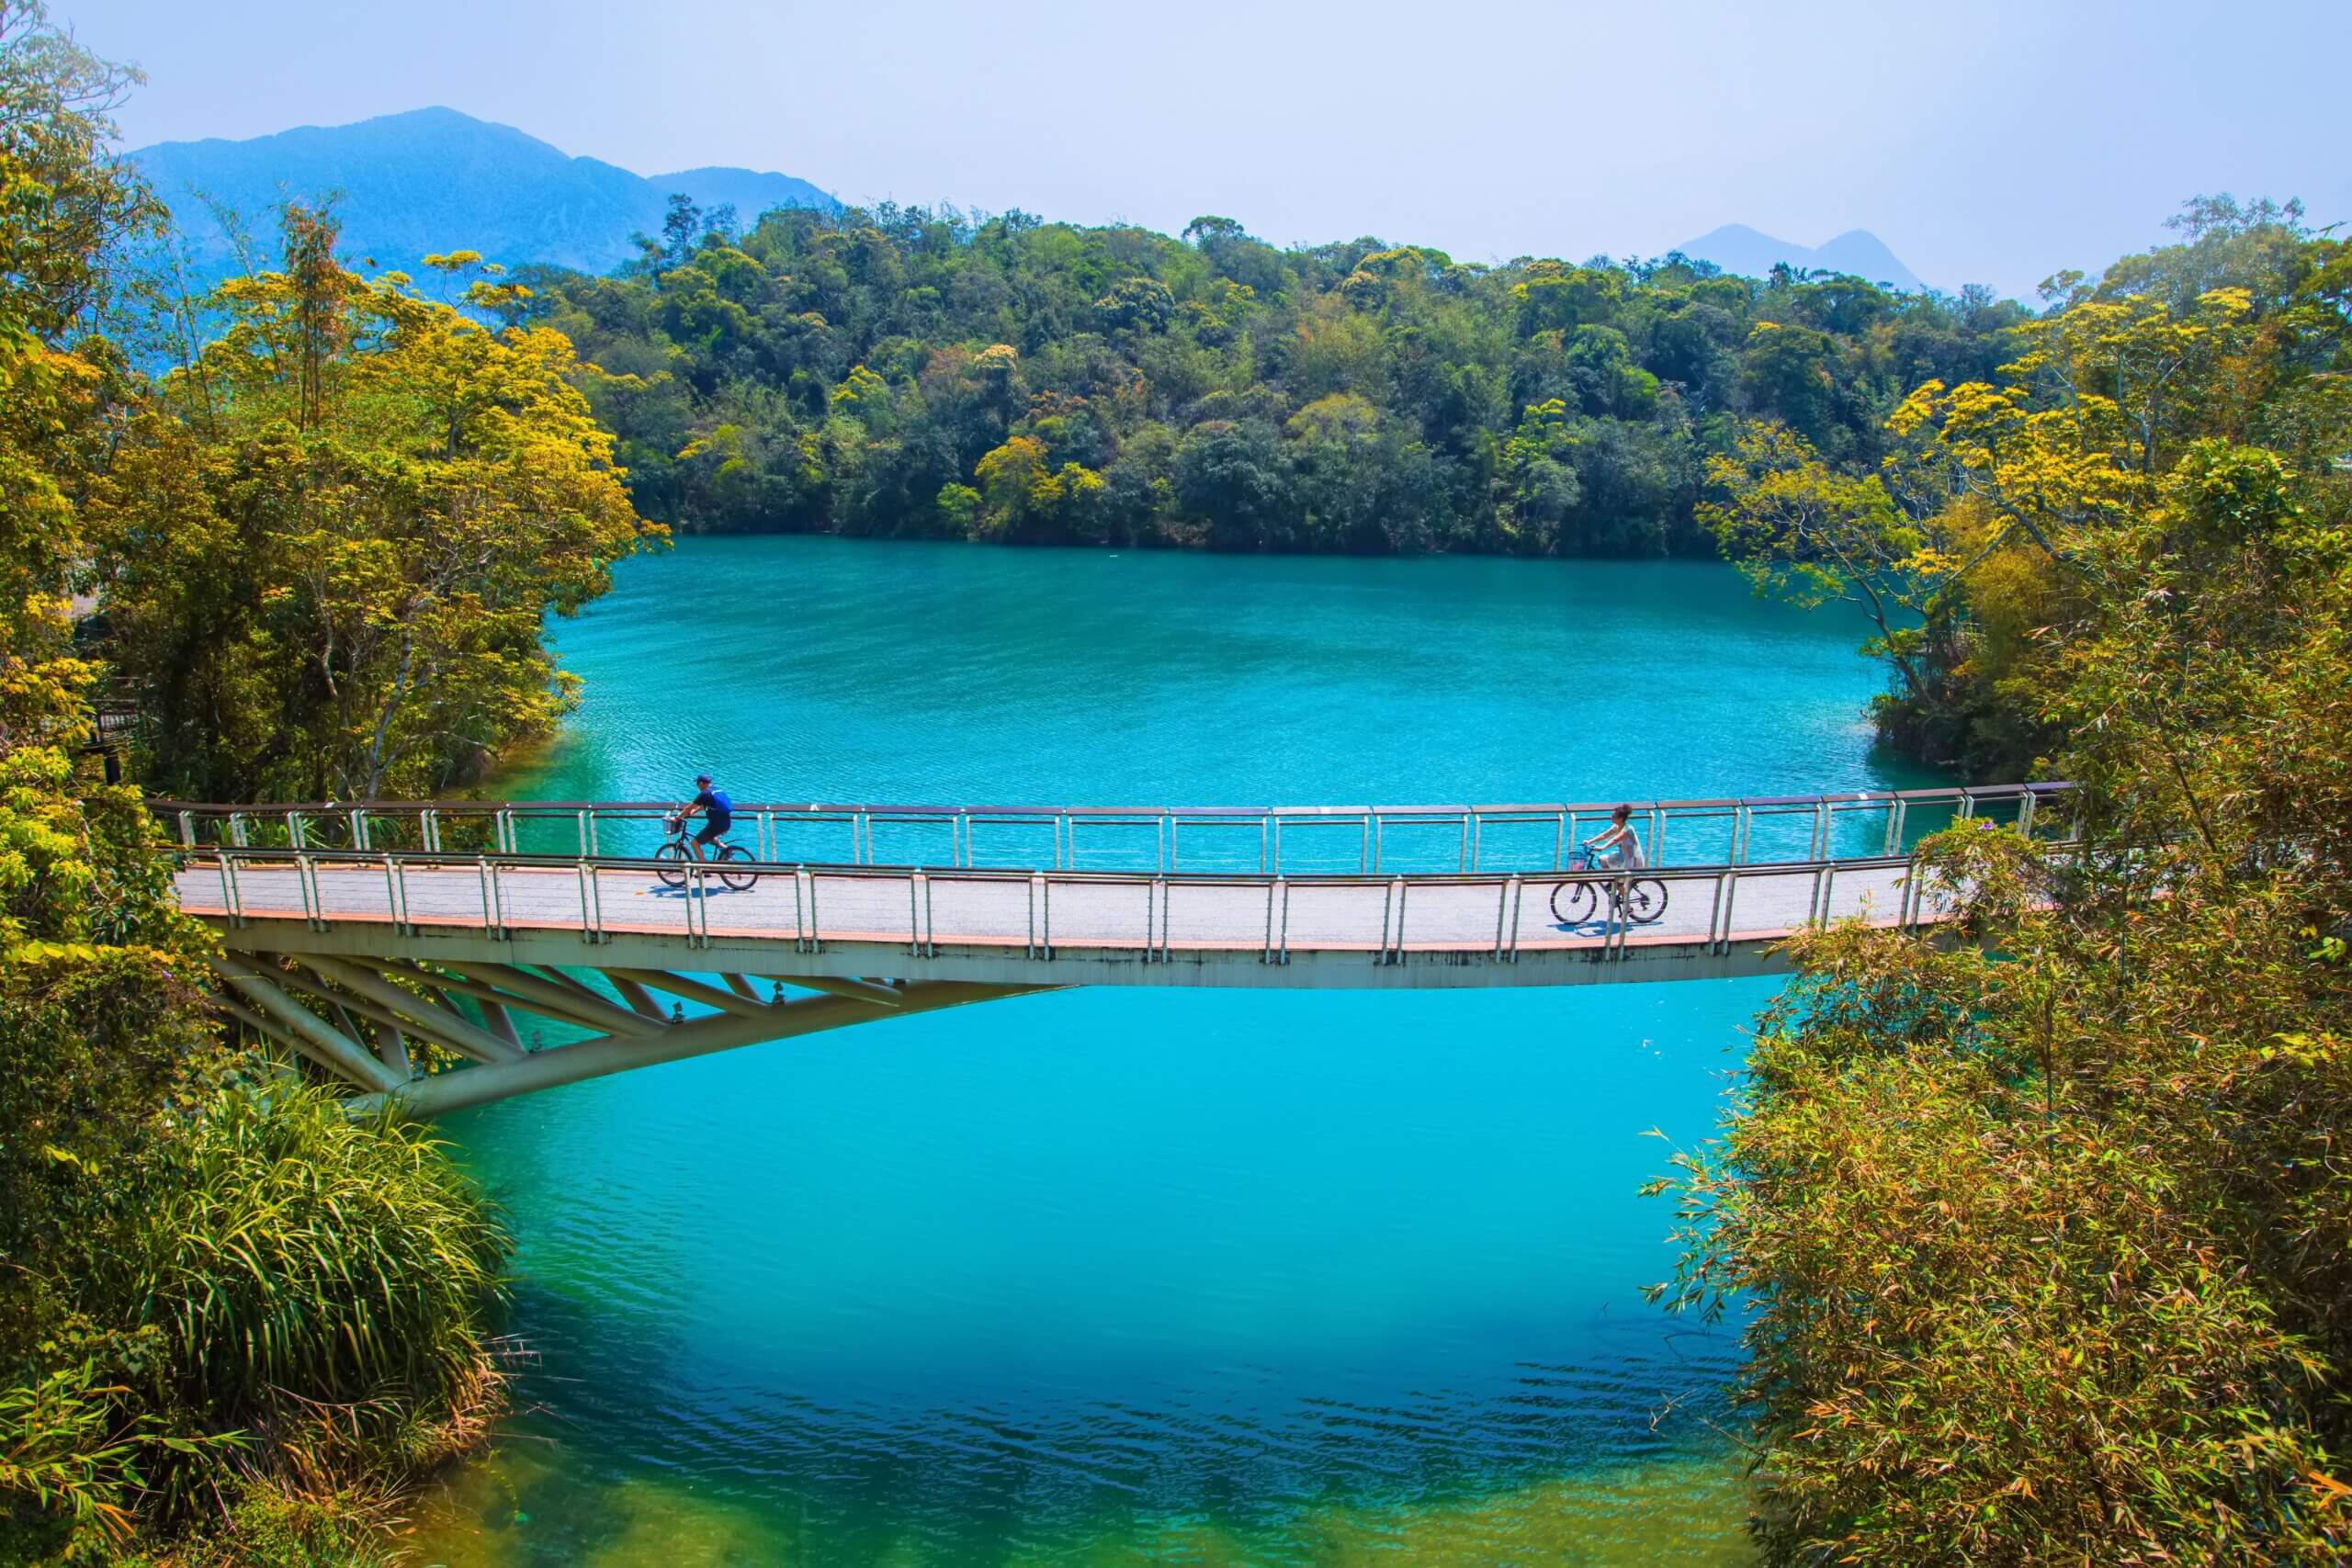 bicycle touring routes: Cycling route No.1 Around Taiwan